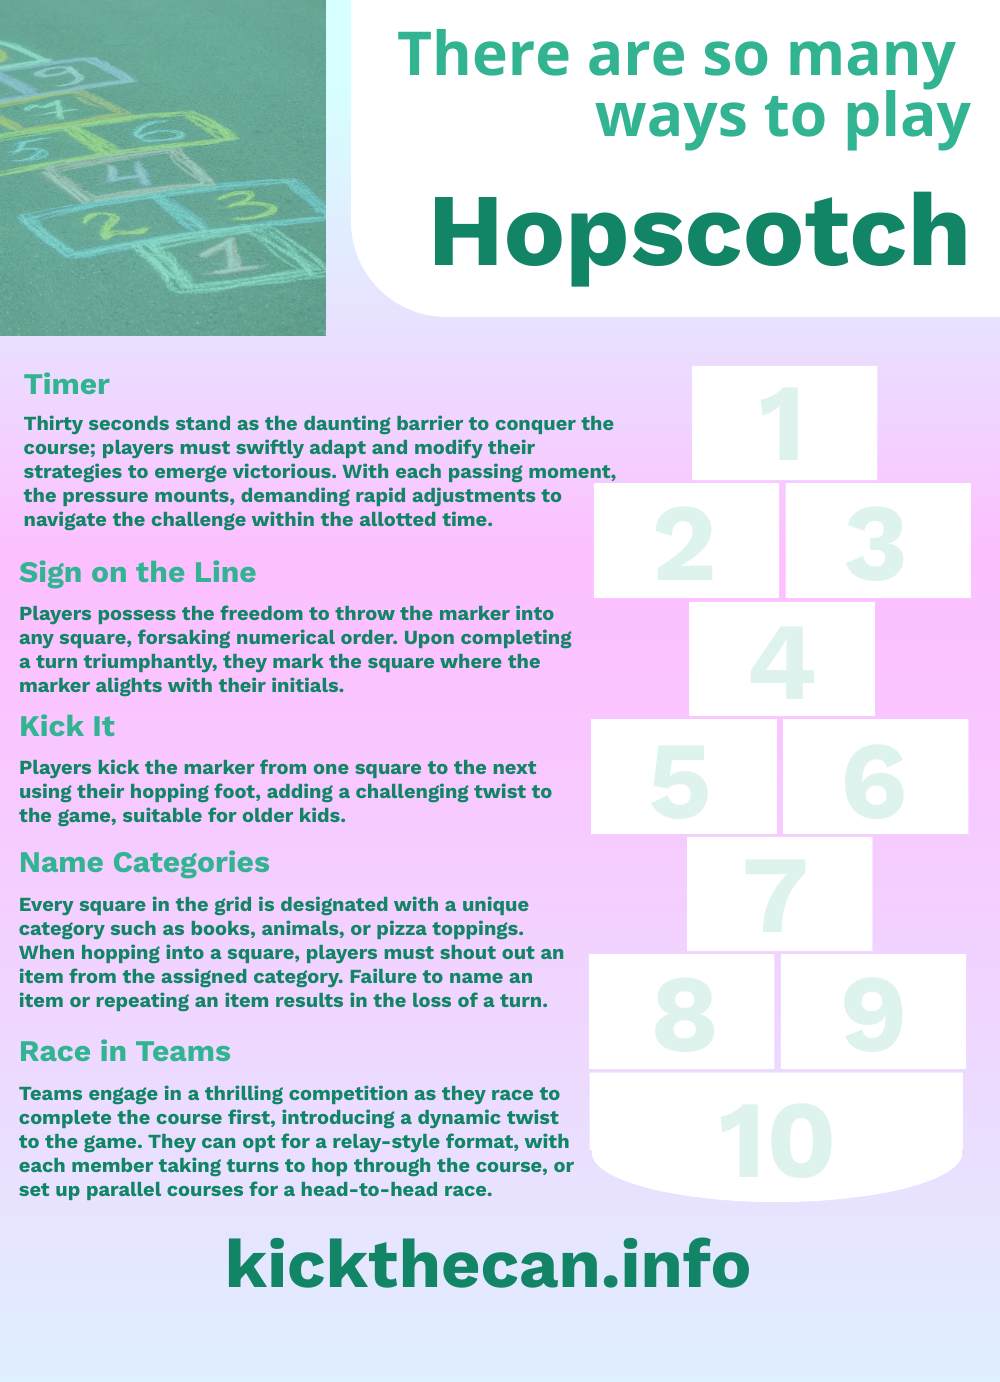 infographic about information how to play hopscotch